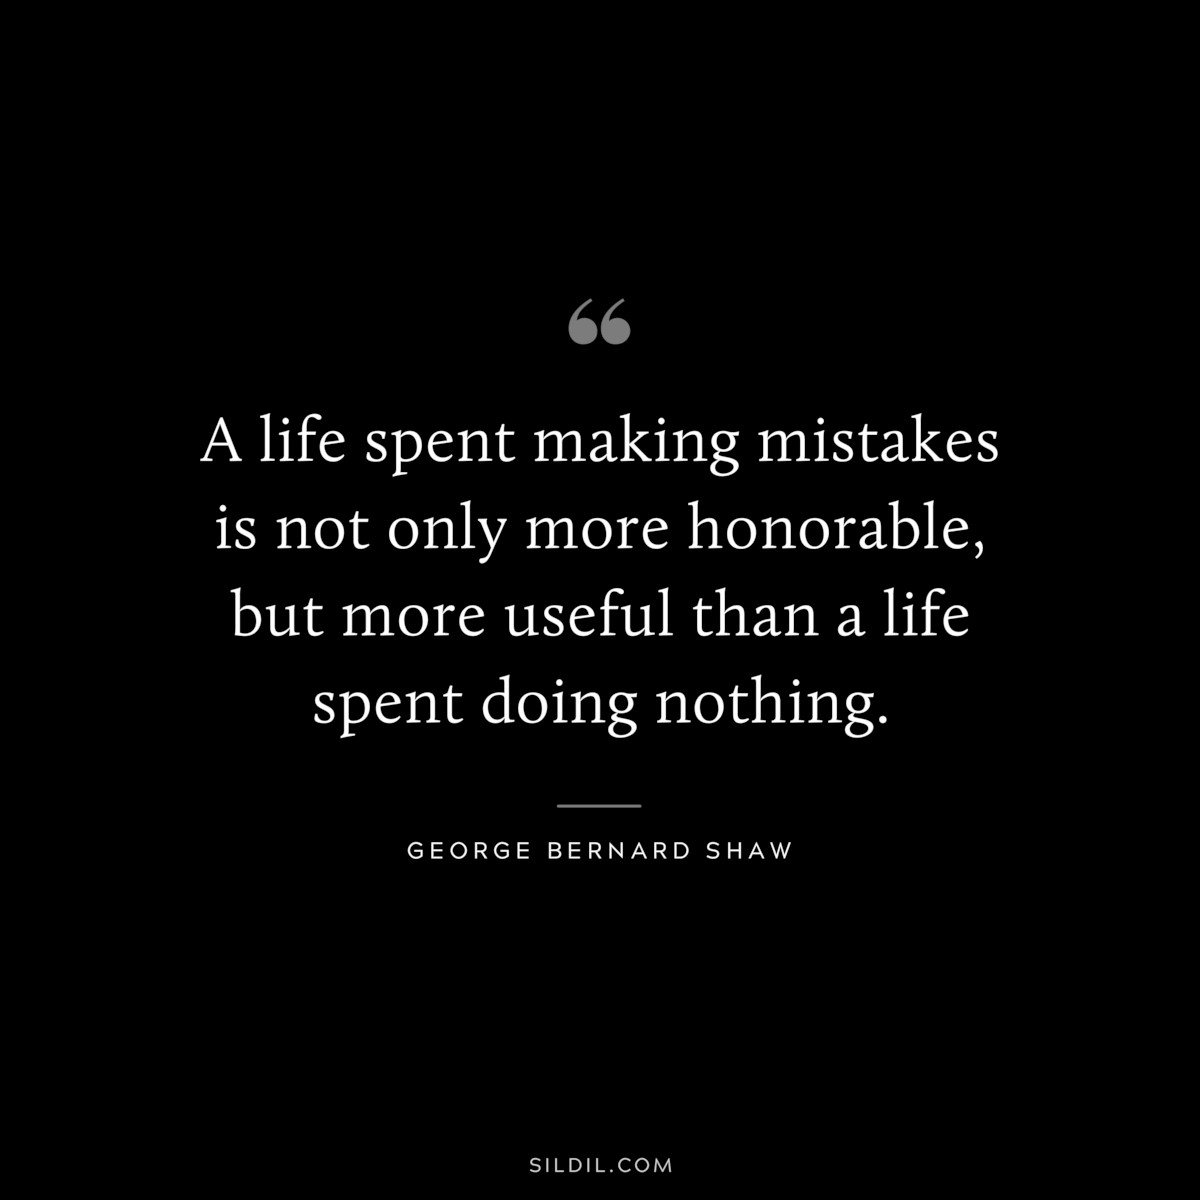 A life spent making mistakes is not only more honorable, but more useful than a life spent doing nothing. ― George Bernard Shaw